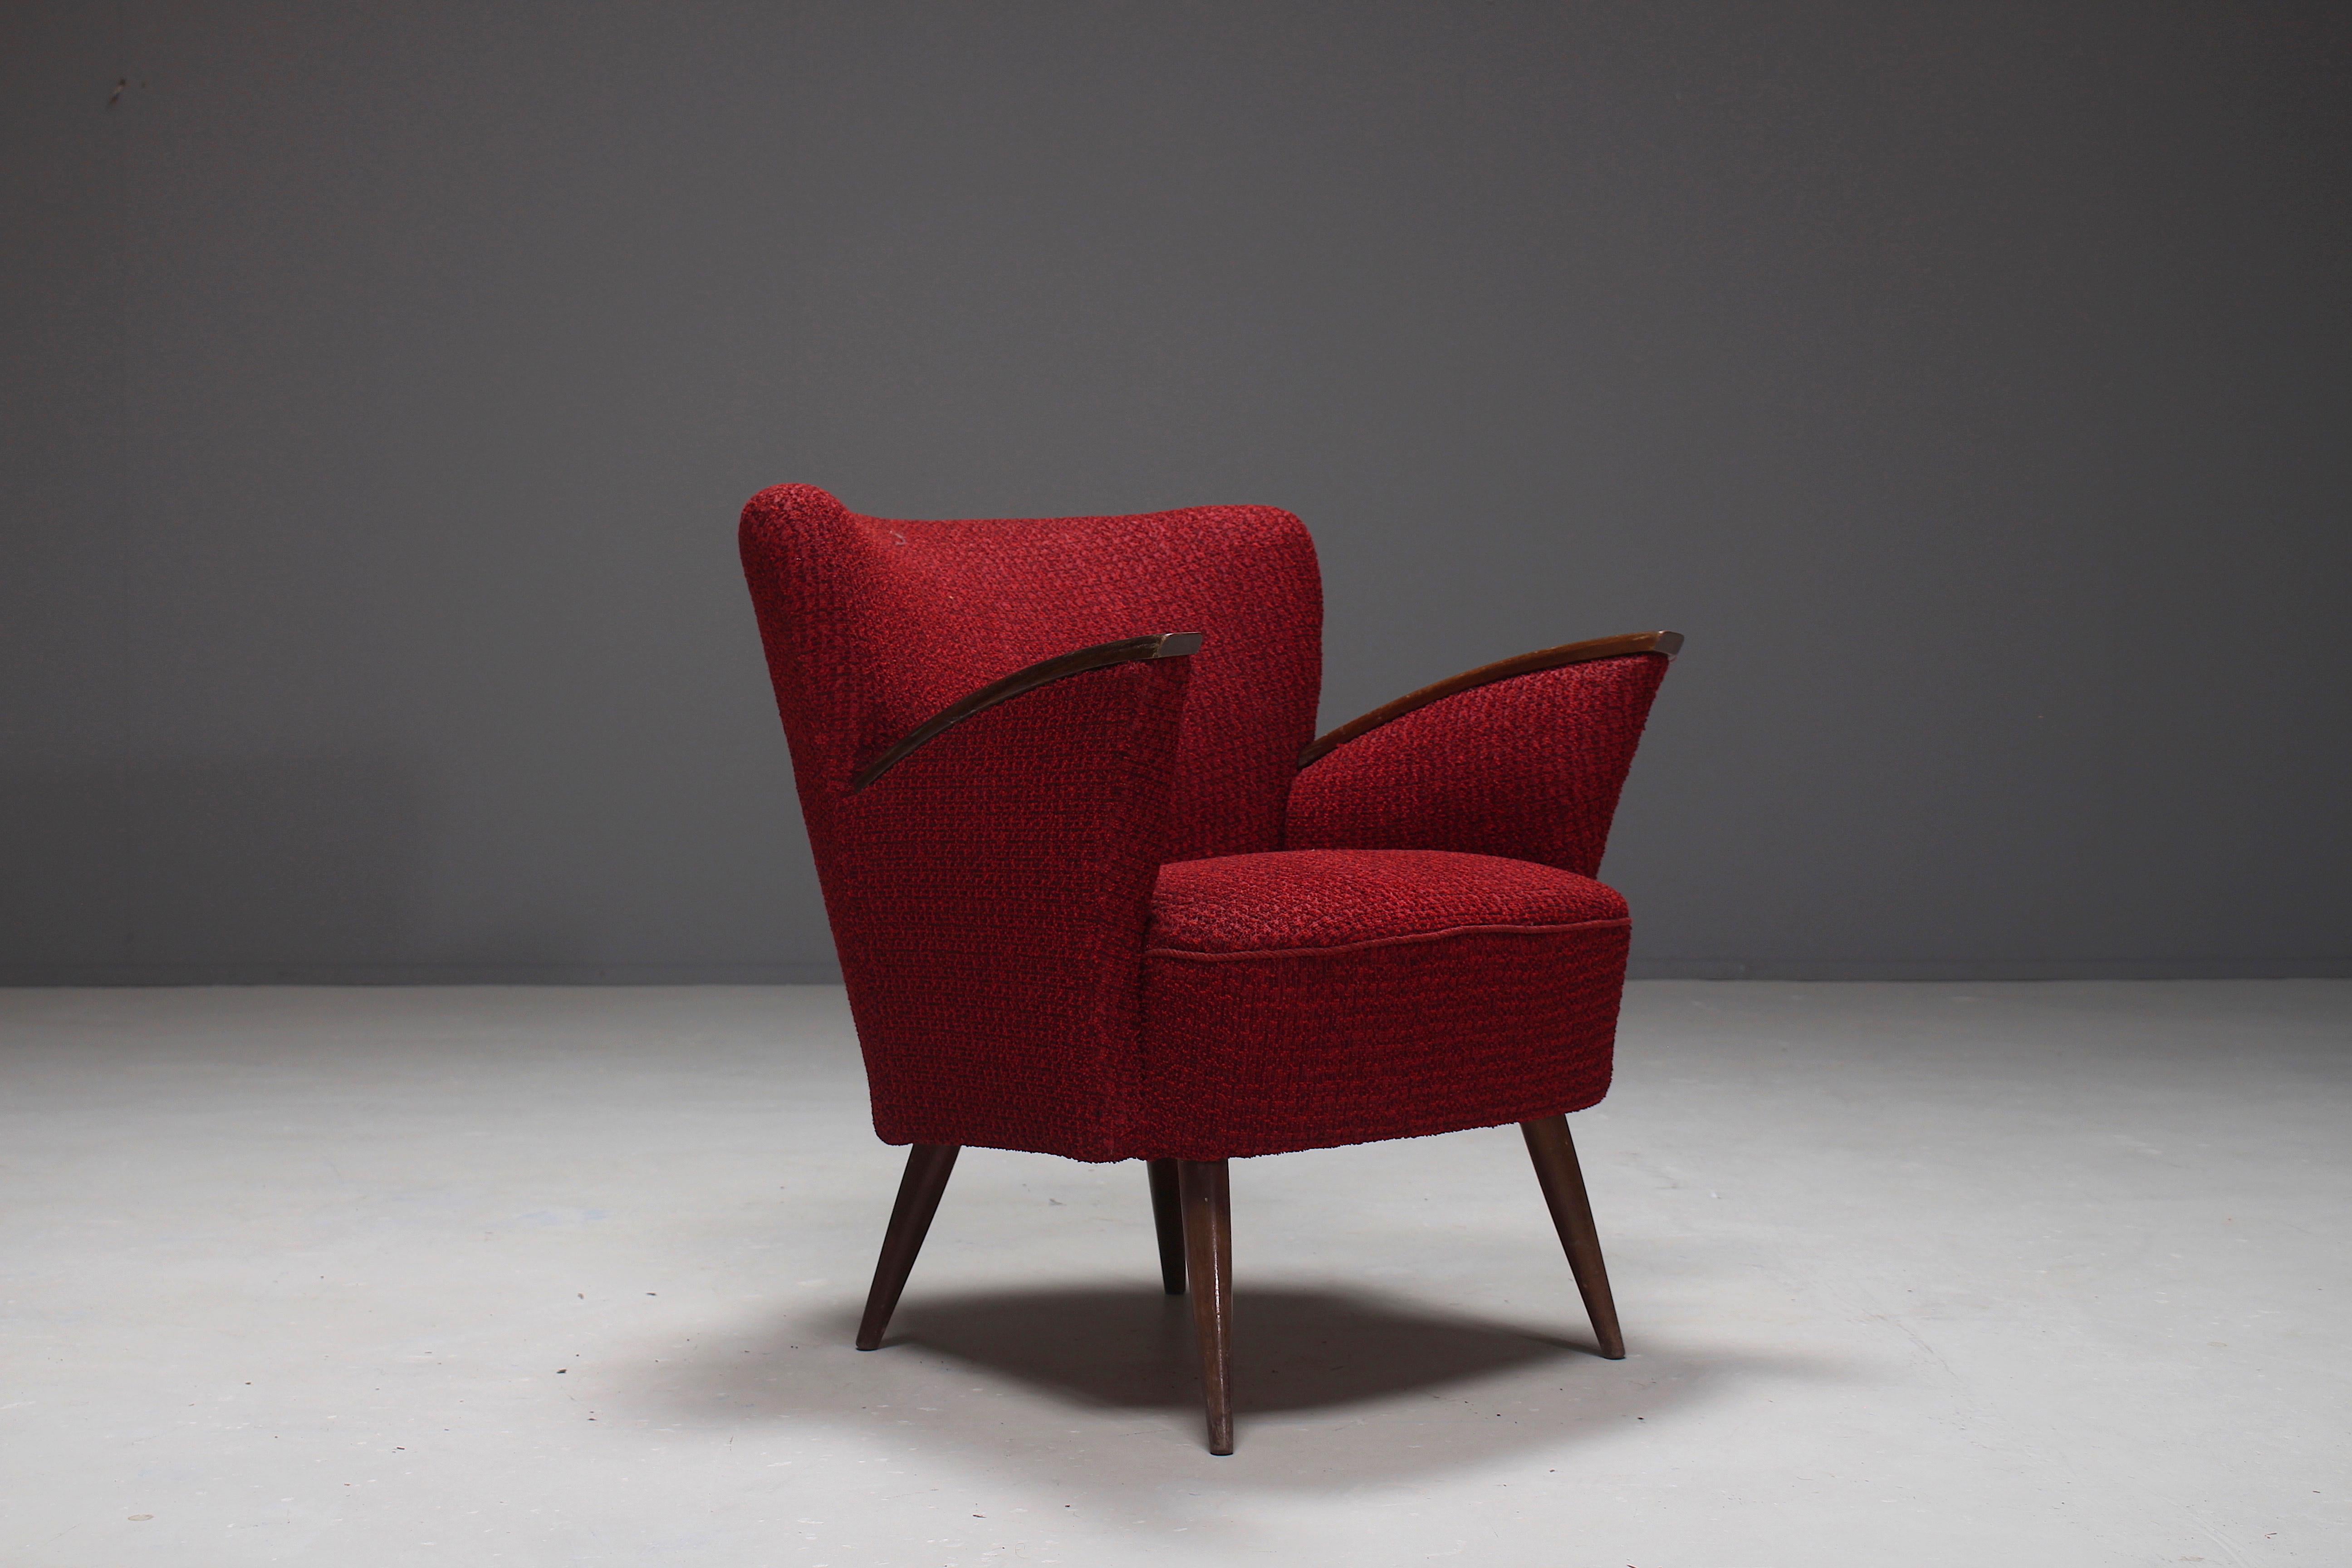 Wood Pair of Italian Gio Ponti Style Club Chairs in Red Wool Fabric, 1950s For Sale